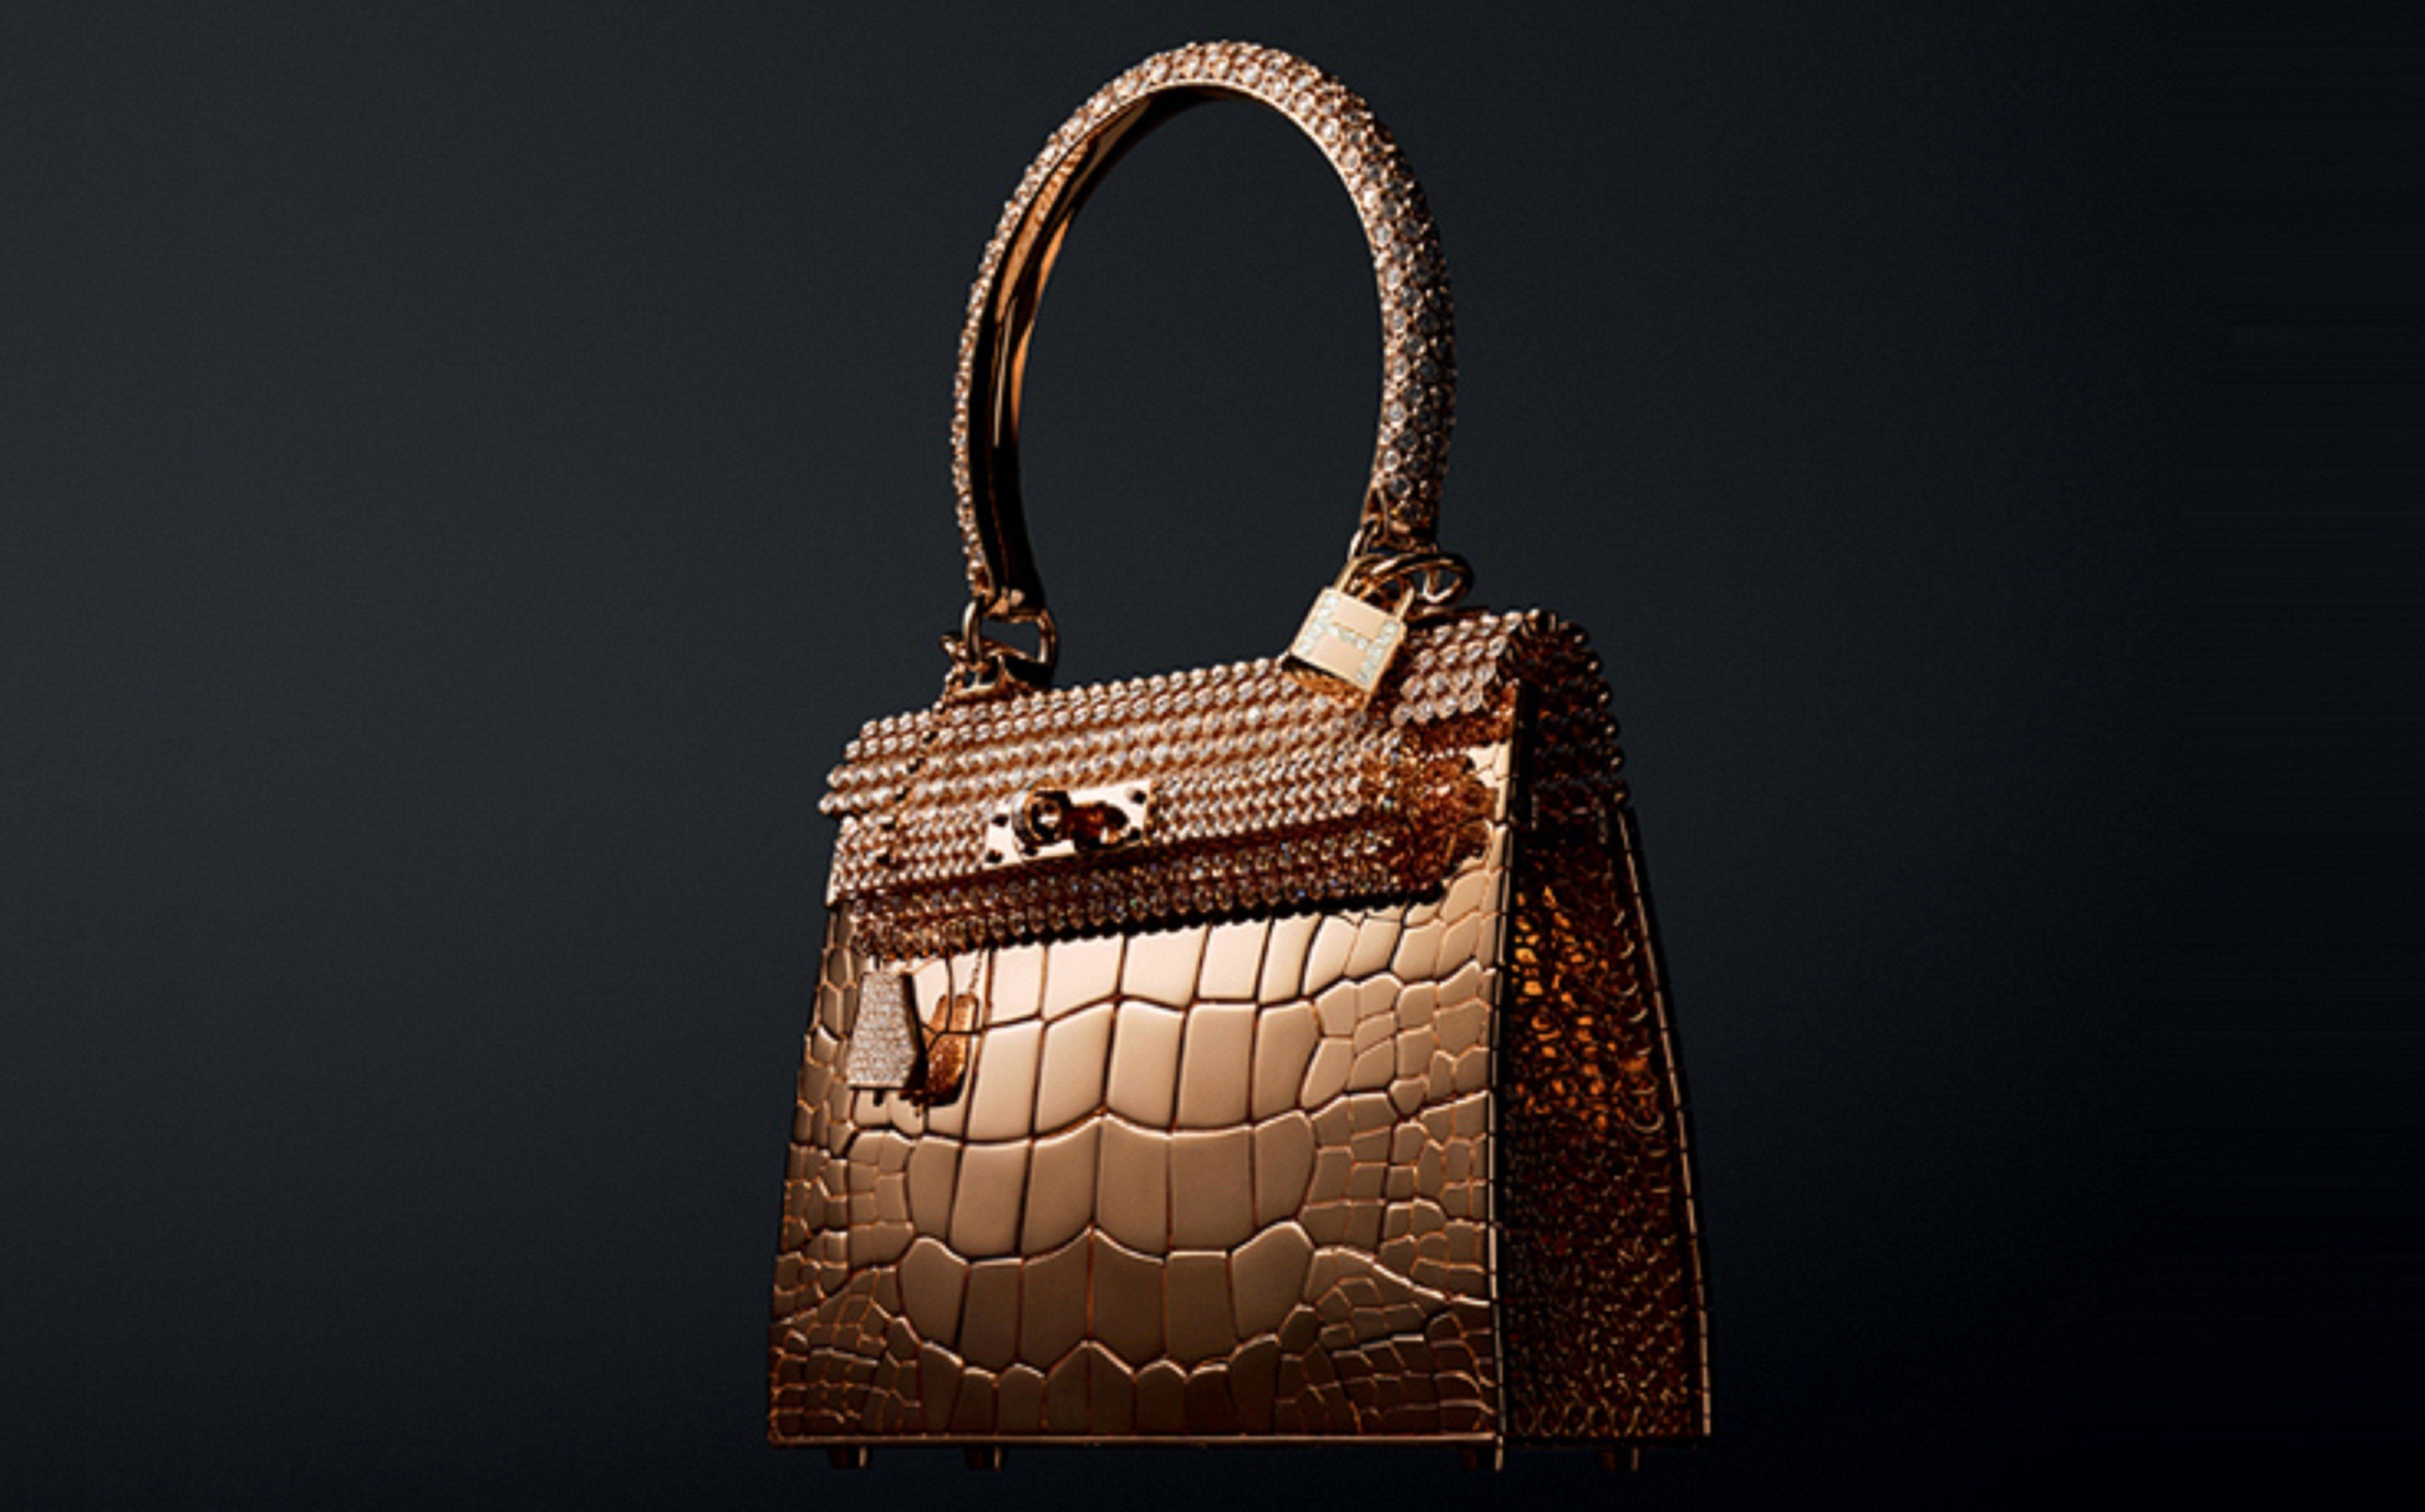 10 Most Expensive Handbags In The World with Huge Price Tags